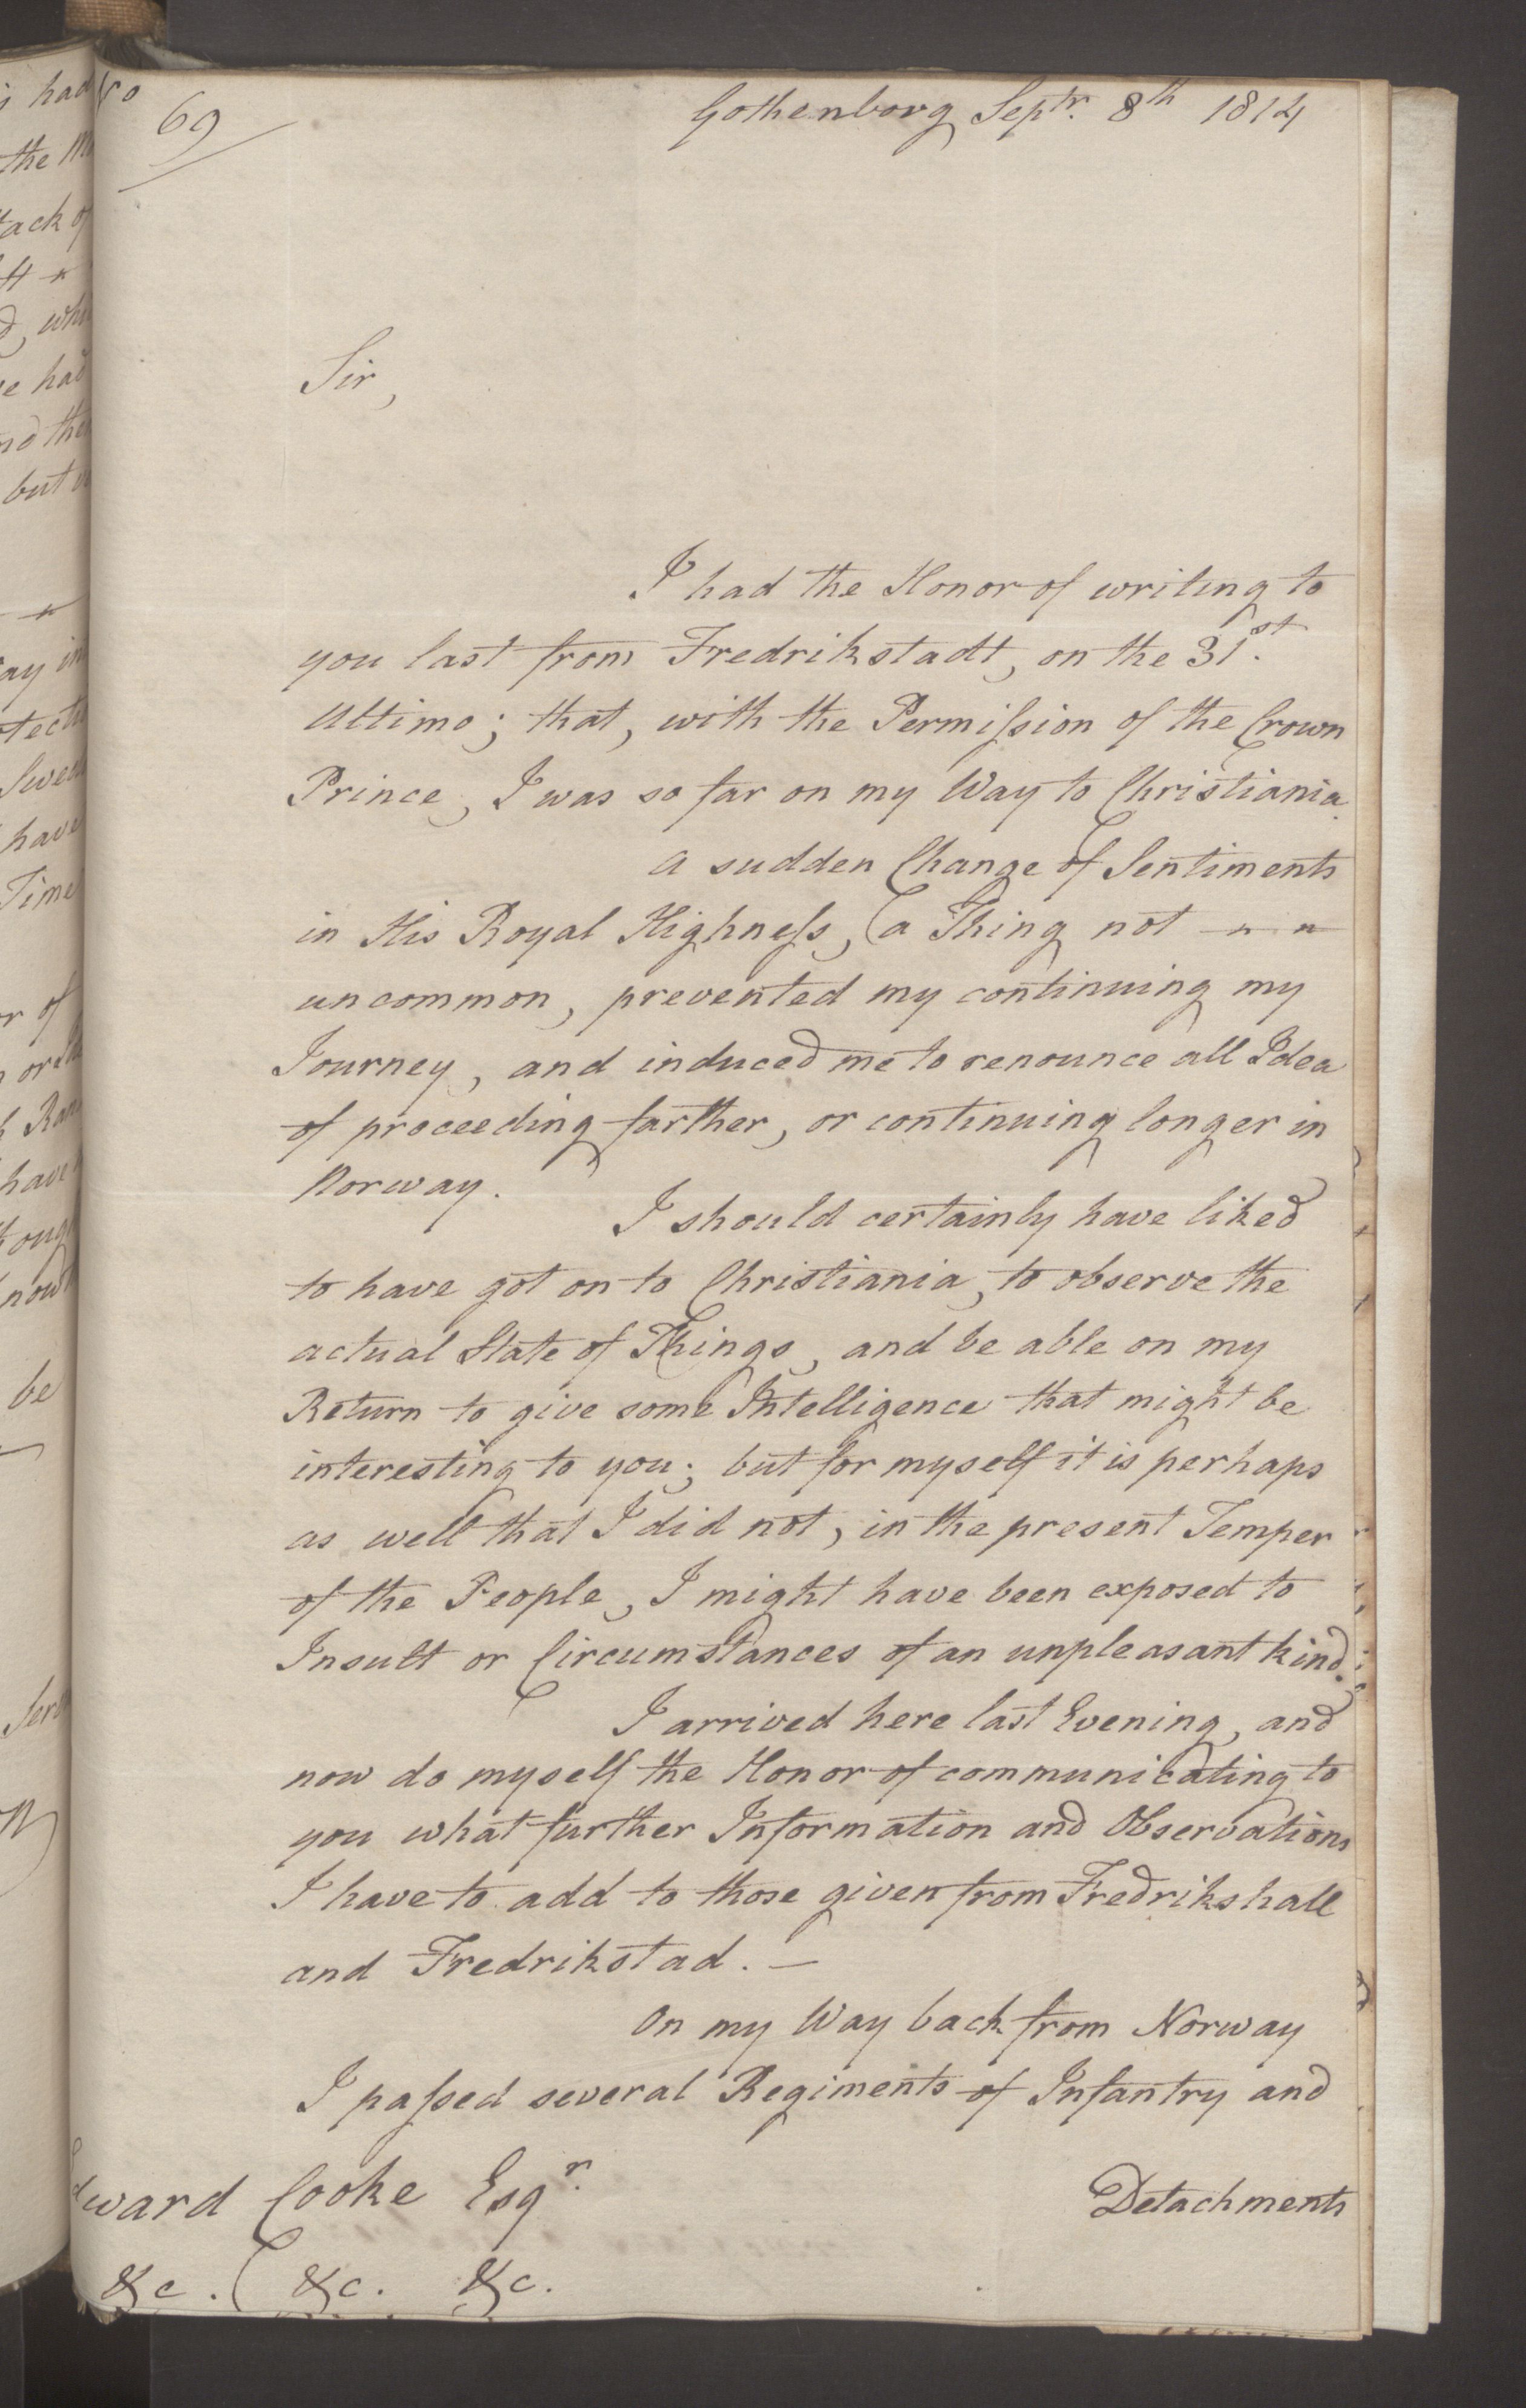 Foreign Office*, UKA/-/FO 38/16: Sir C. Gordon. Reports from Malmö, Jonkoping, and Helsingborg, 1814, p. 107